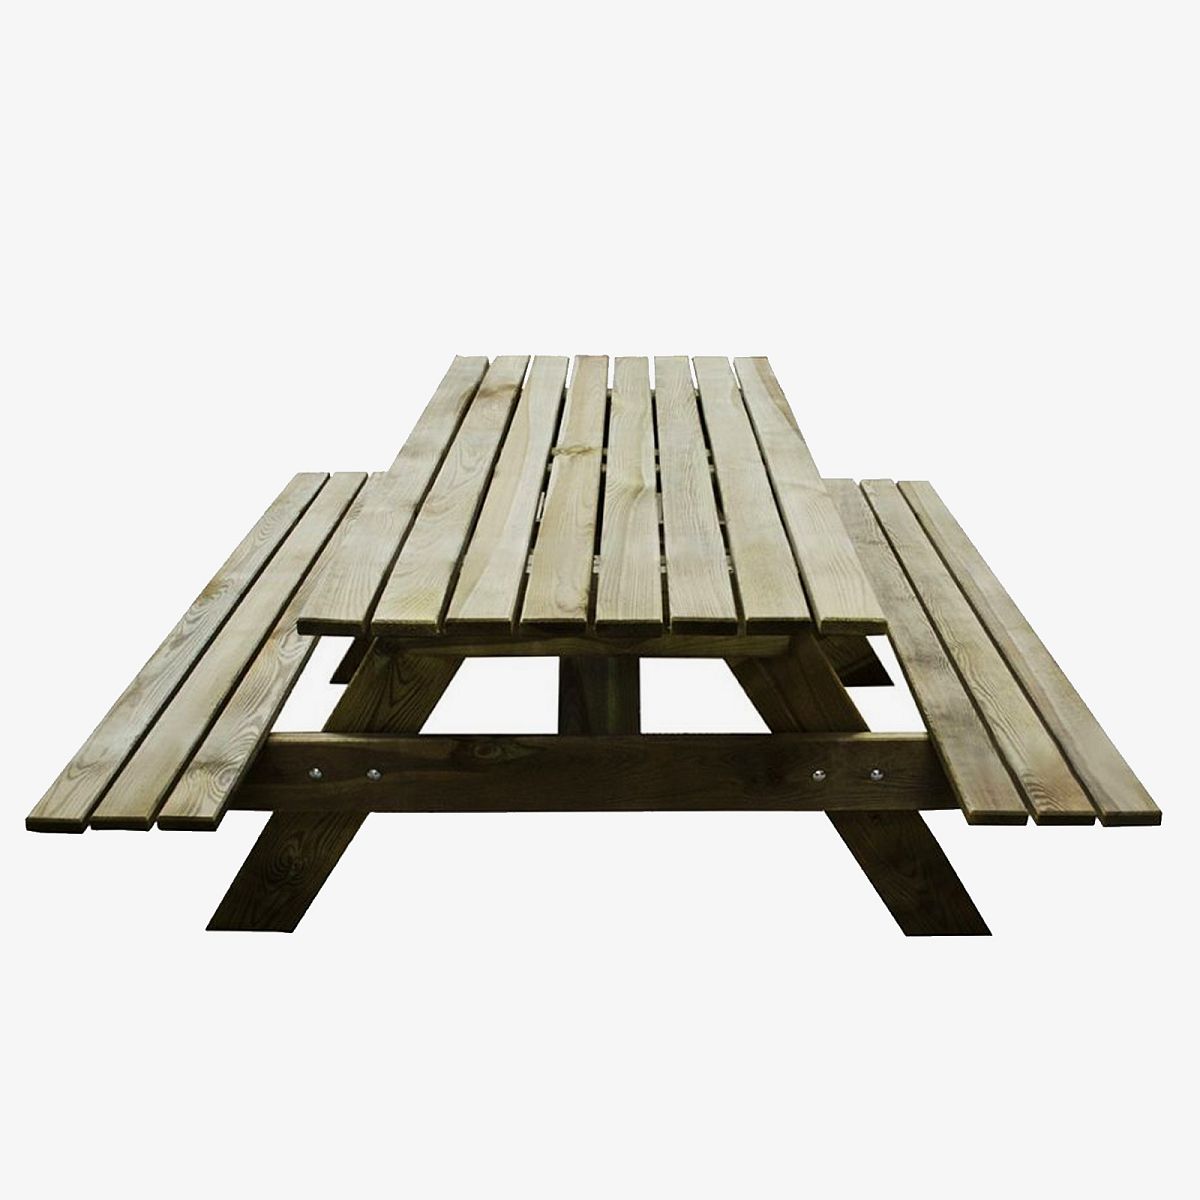 Outdoor Wooden Rectangular Picnic Table by Forest Garden